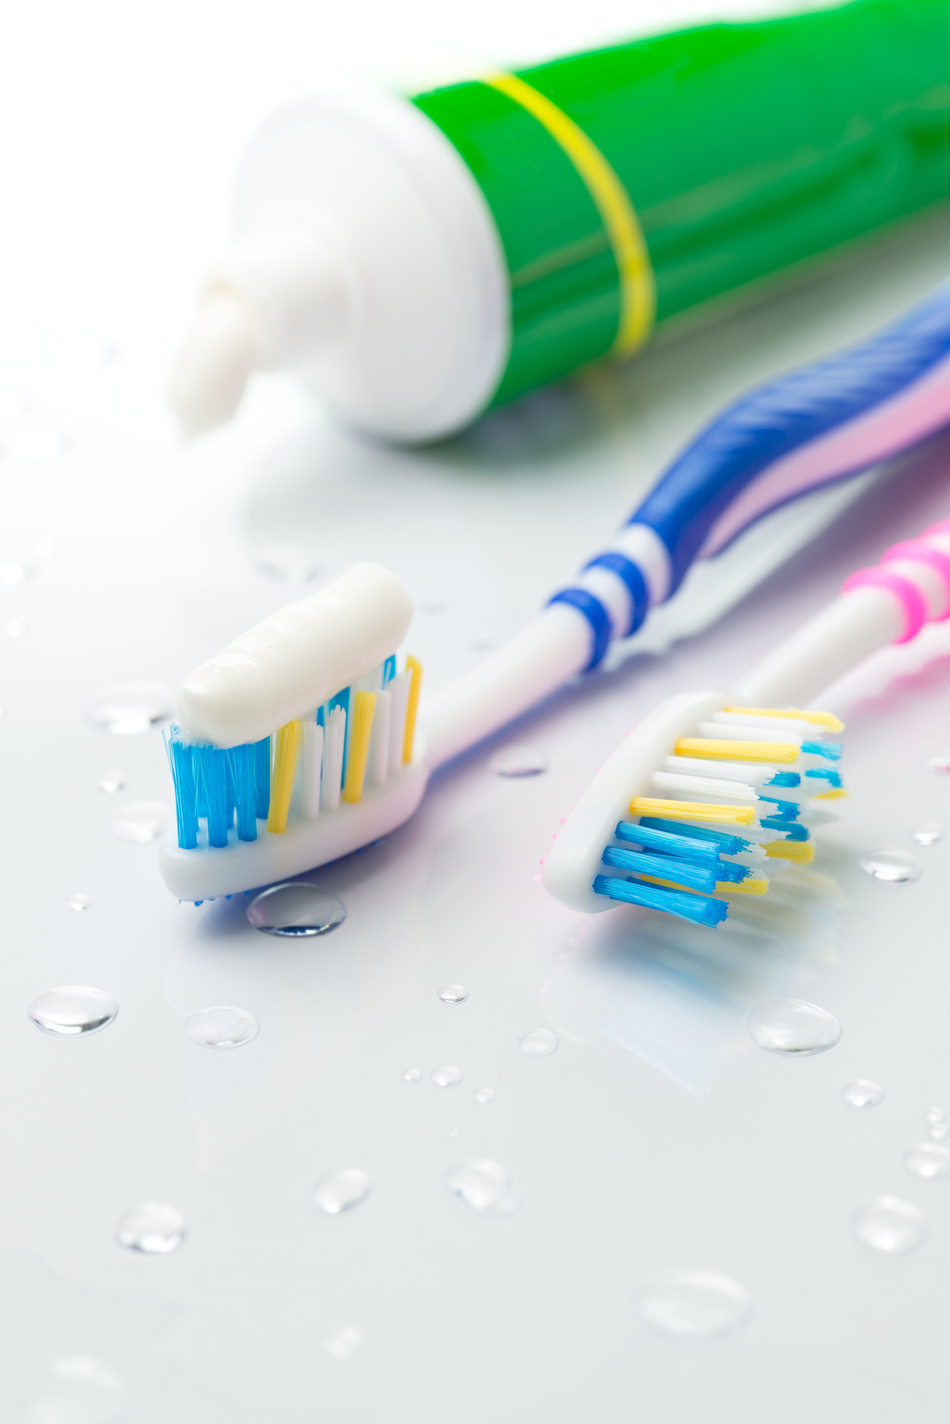 Are There Benefits to Using Fluoride-Free Toothpaste?